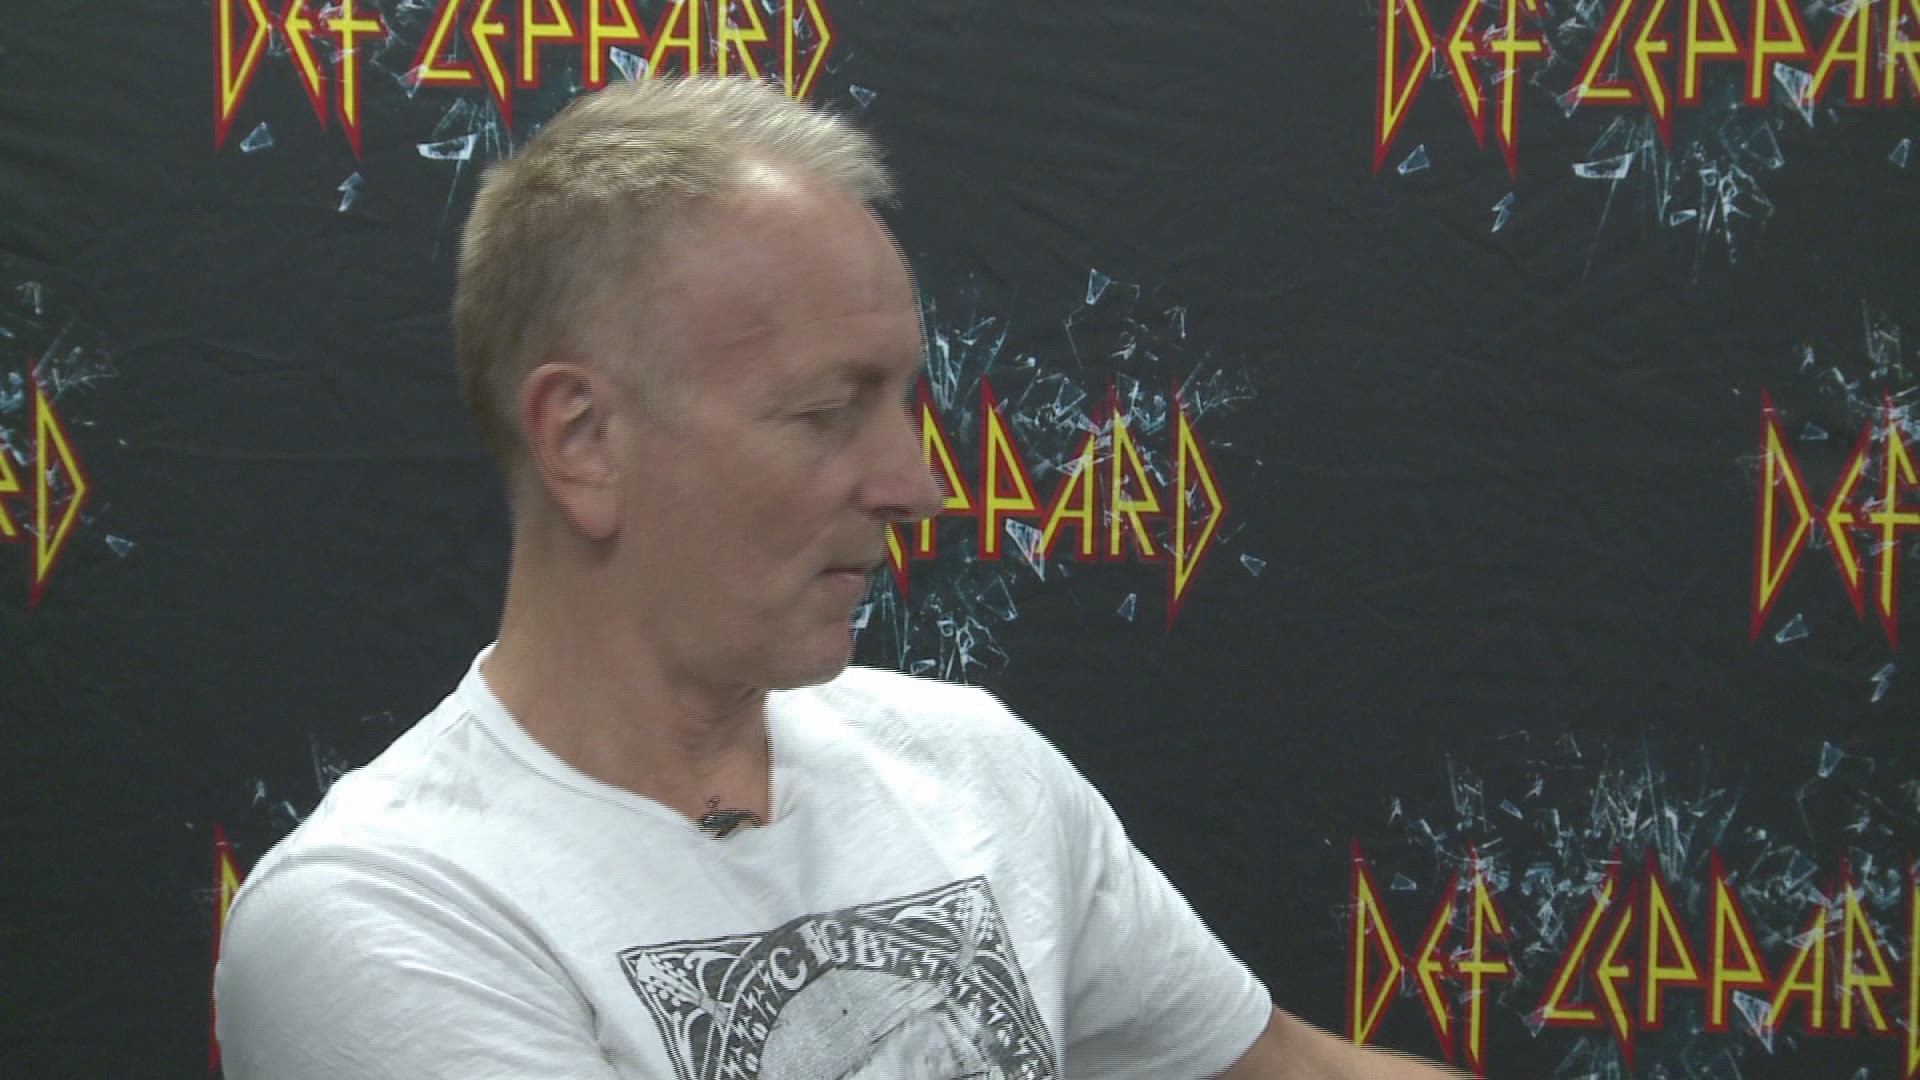 Full interview with Def Leppard's Phil Collen